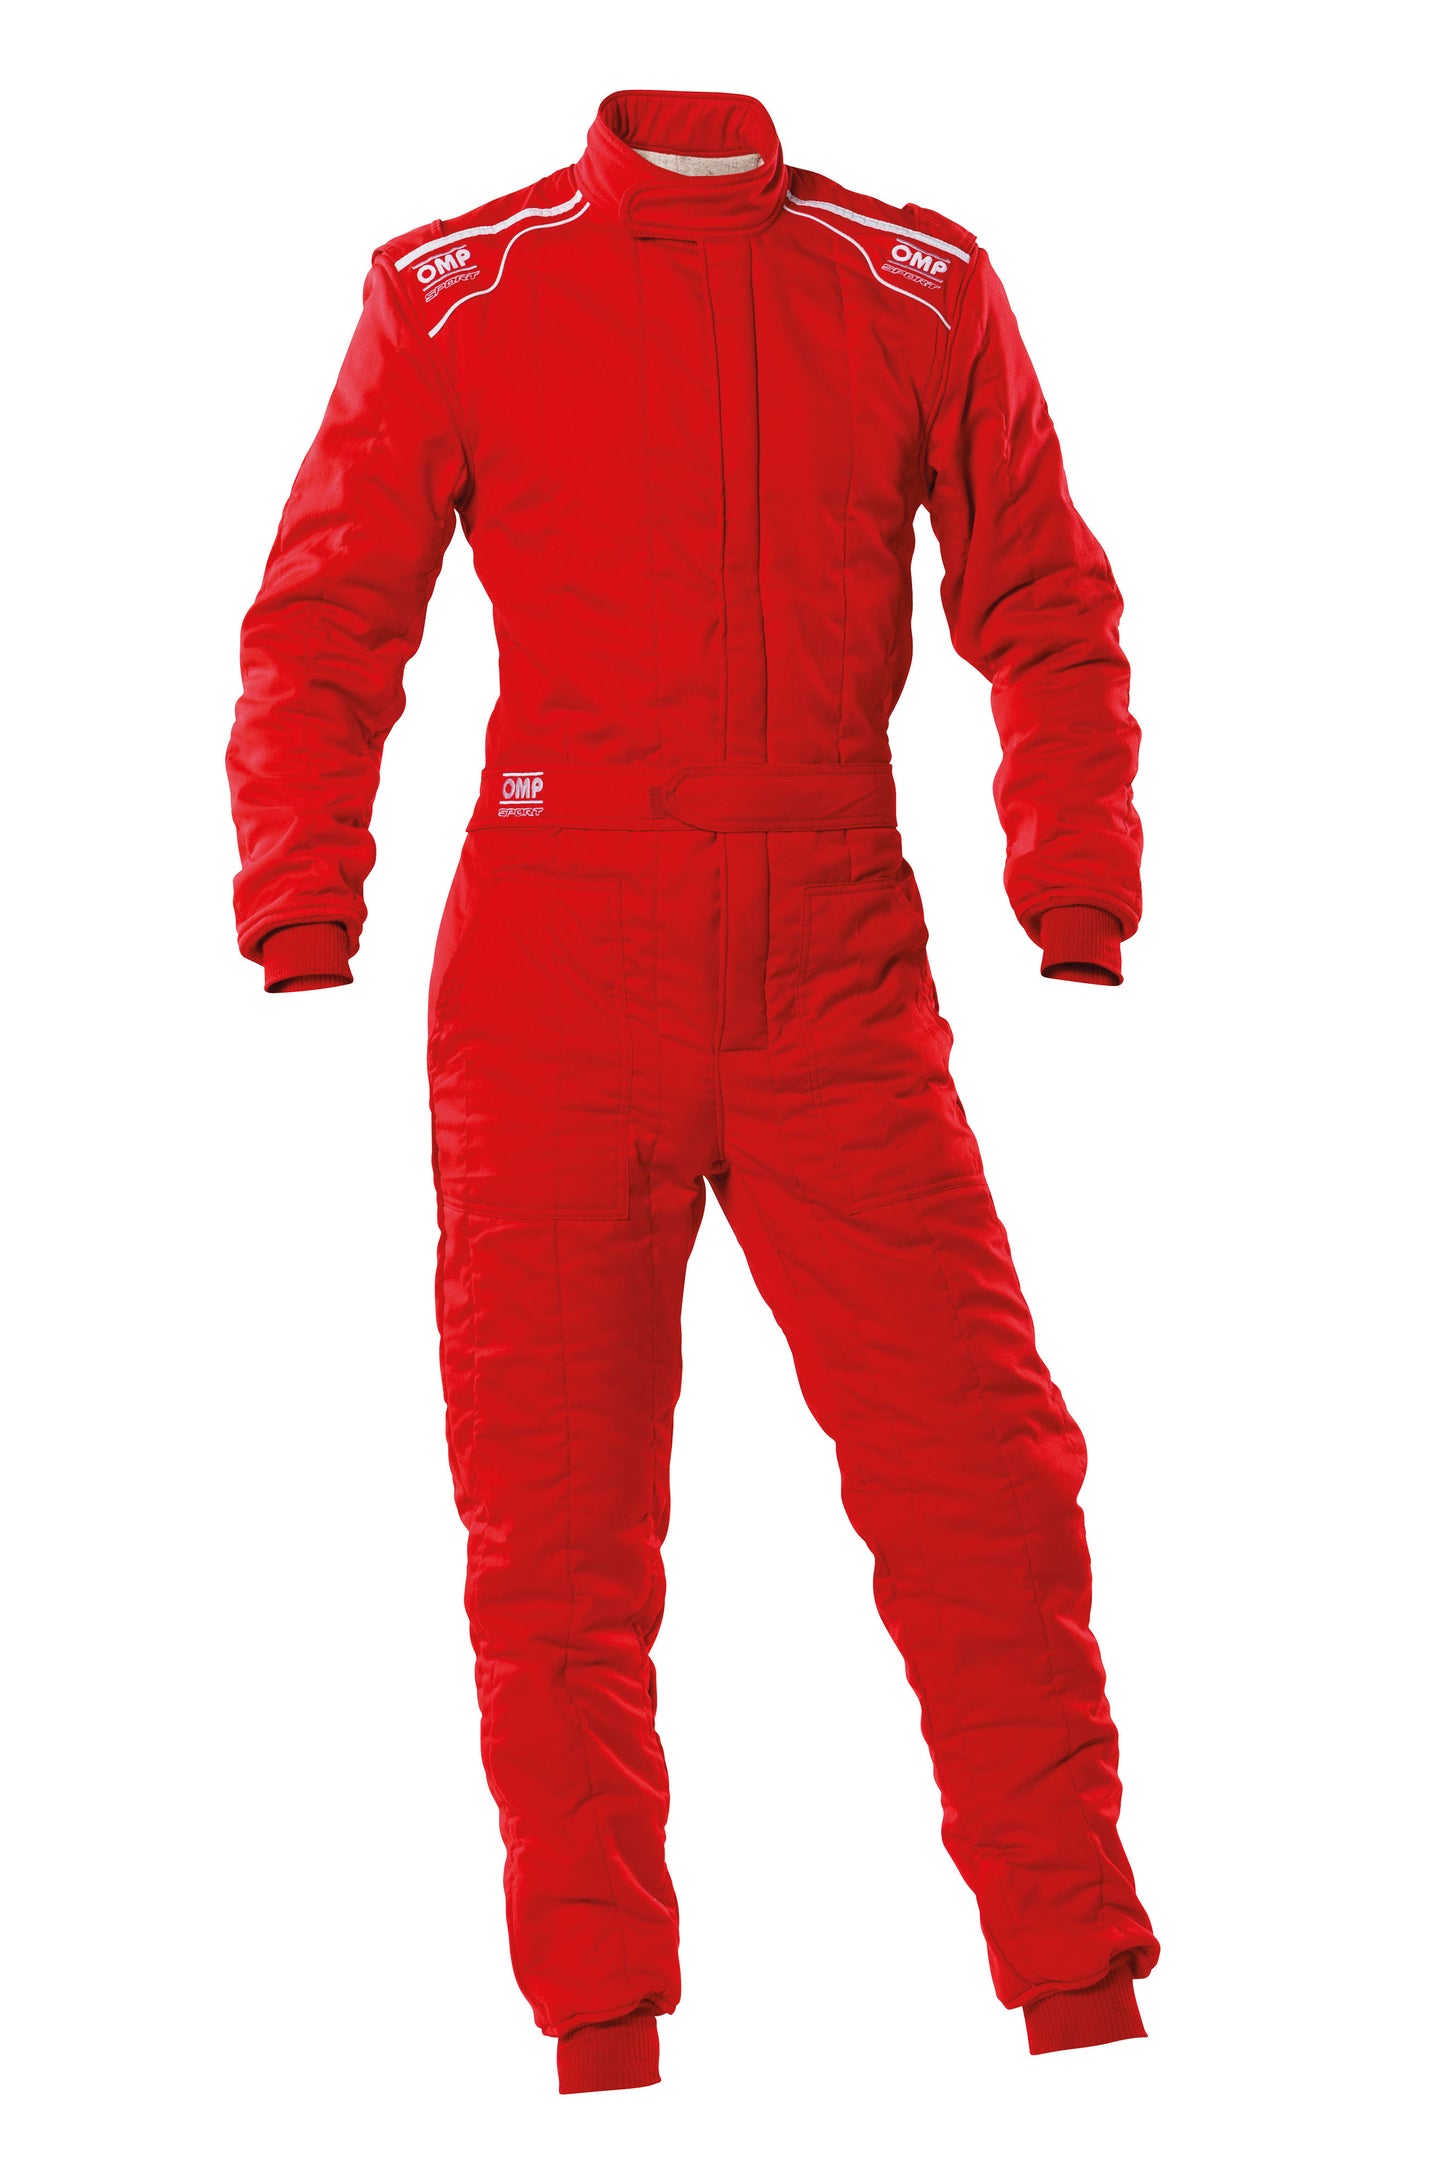 OMP Sport Race Suit Karting Entry Level Overalls Nomex Fireproof FIA Approved